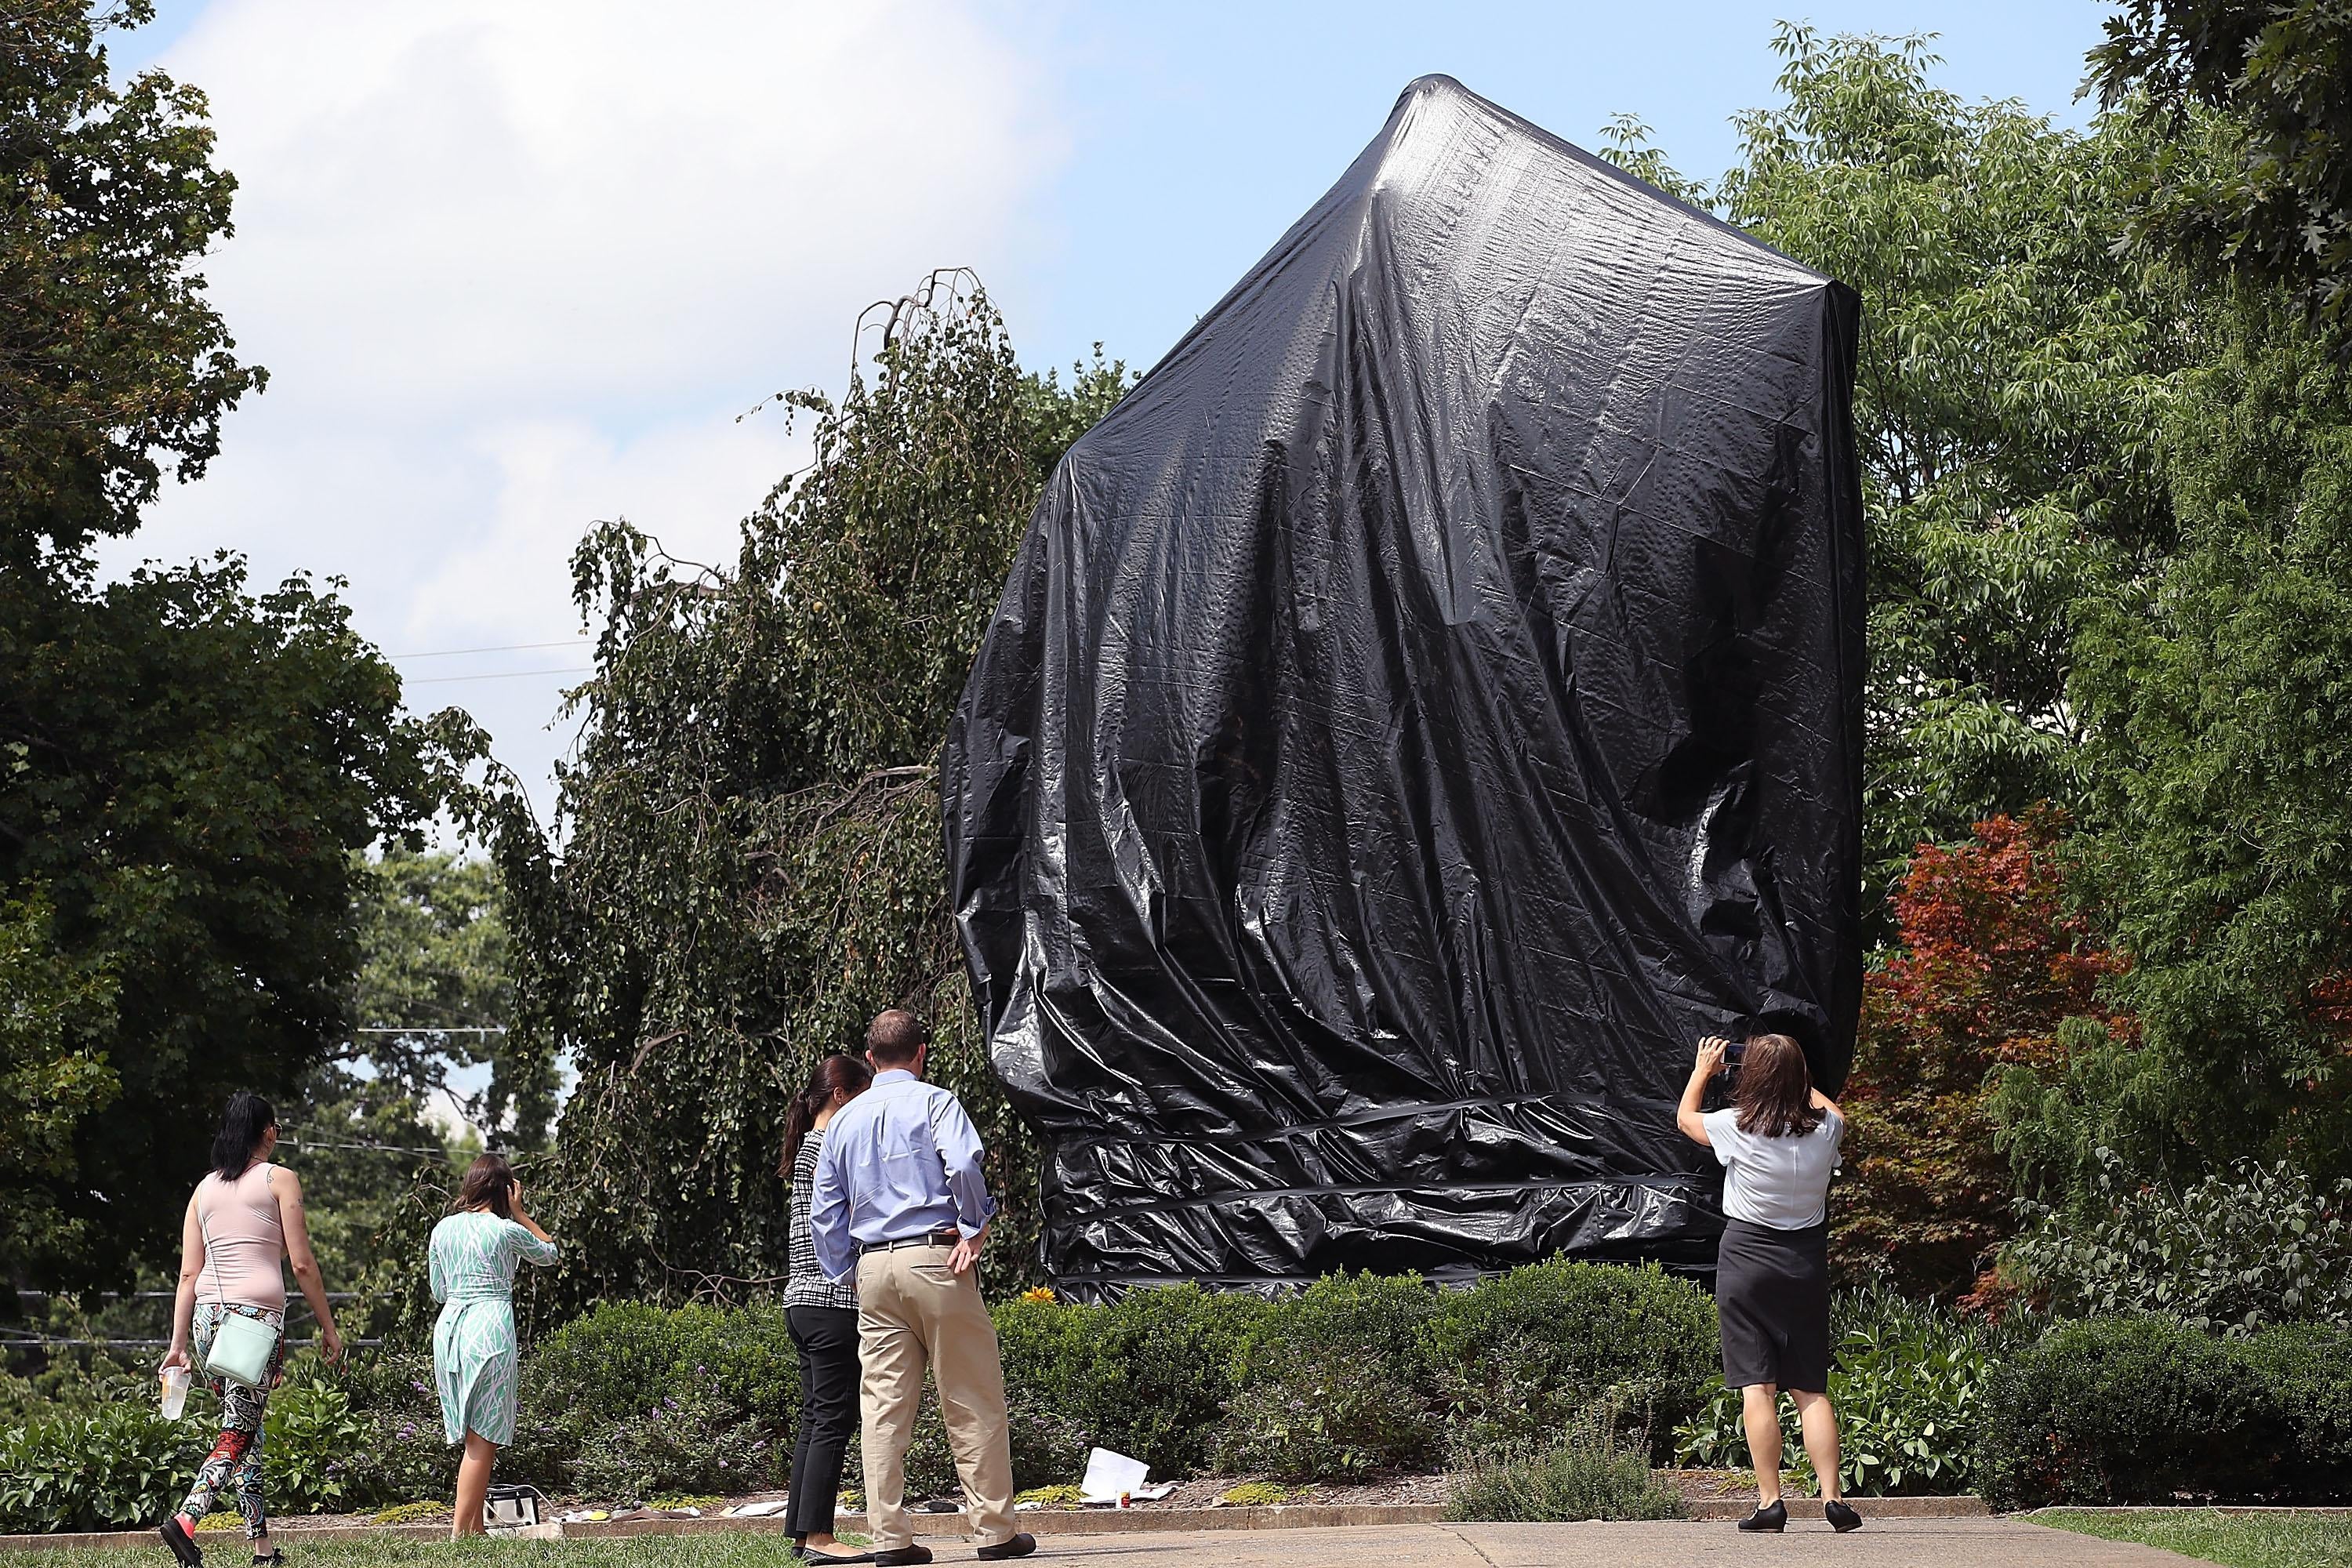 The statue of Confederate Gen. Robert E. Lee covered with a black tarp.